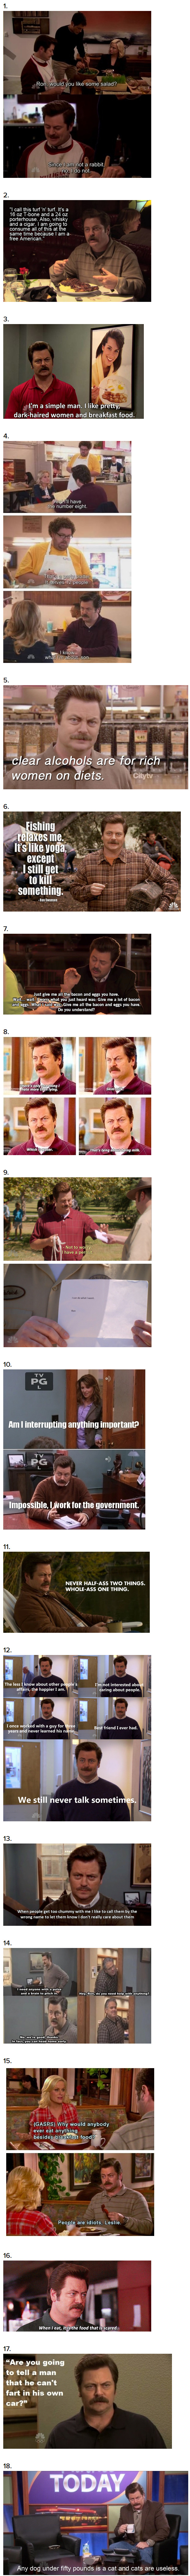 18 of the best Ron Swanson quotes.